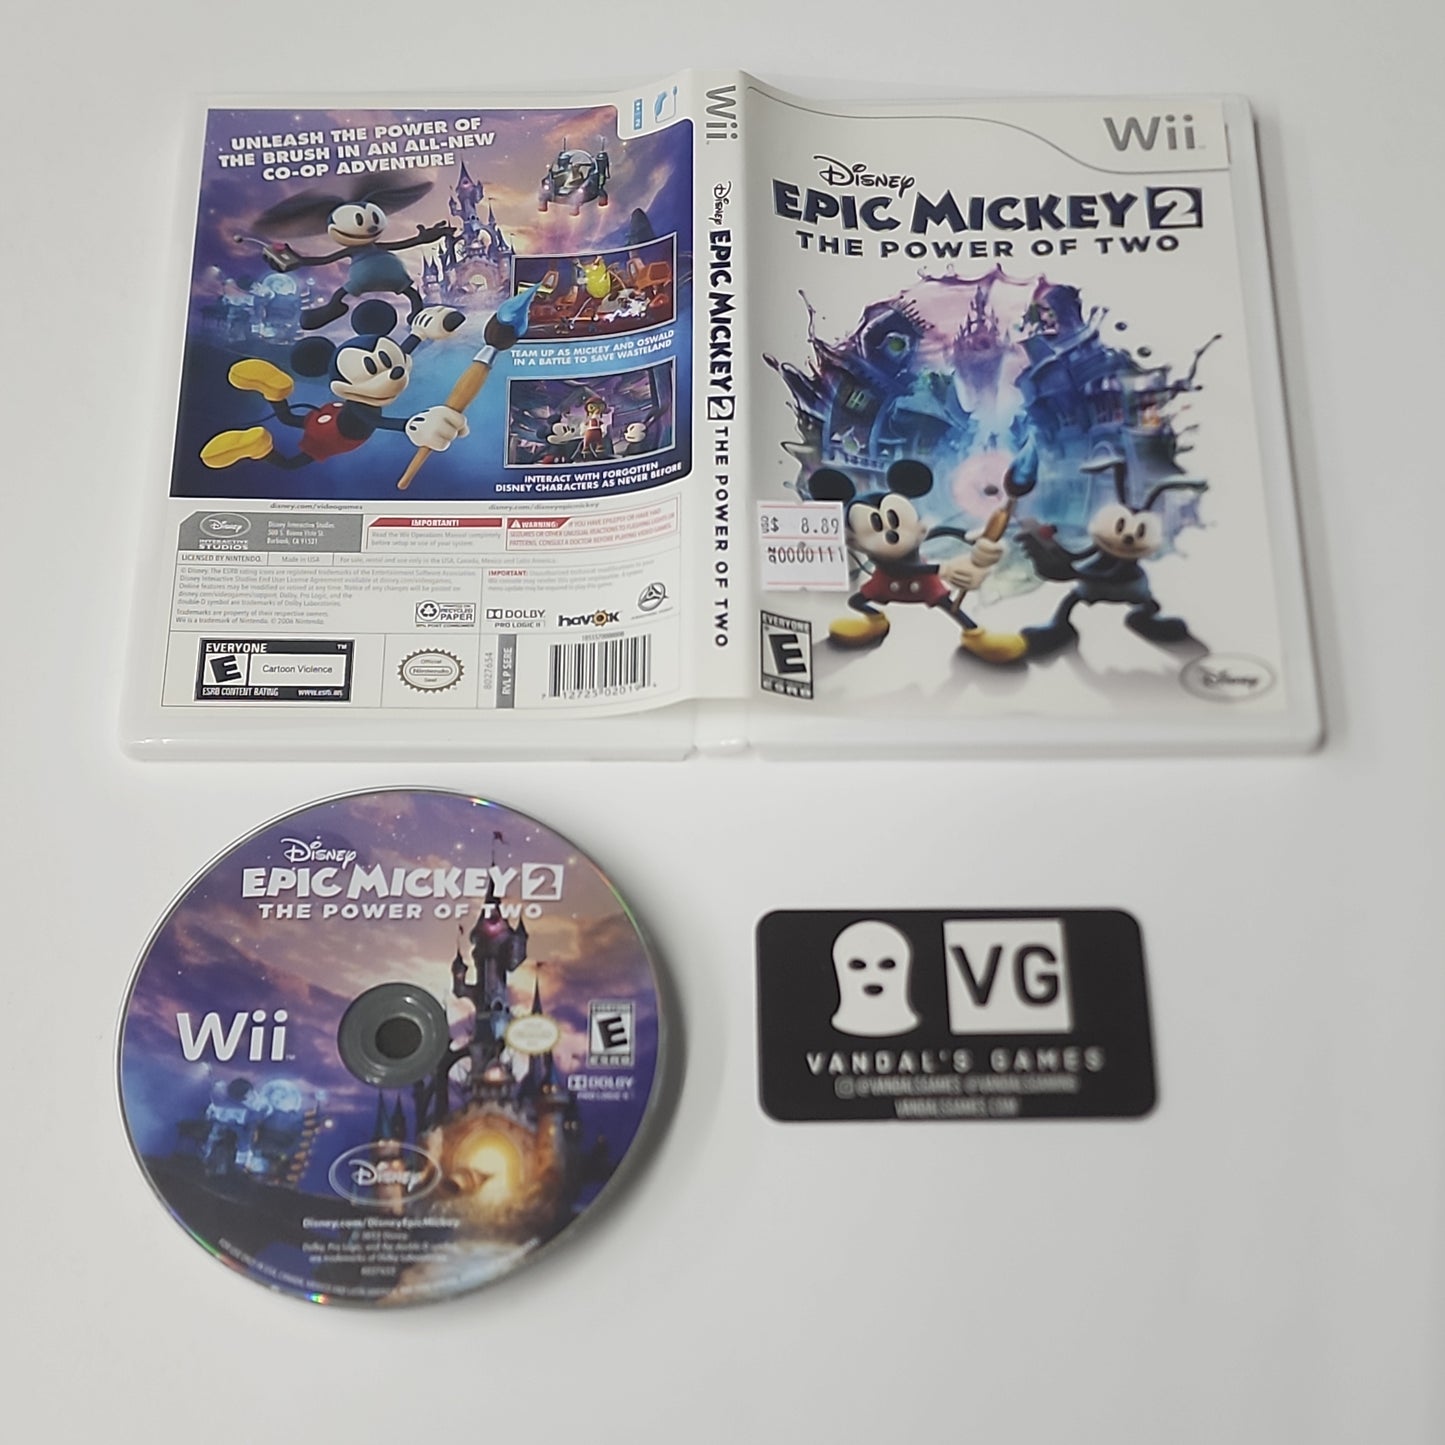 Wii - Epic Mickey 2 The Power of Two Nintendo Wii W/ Case #111